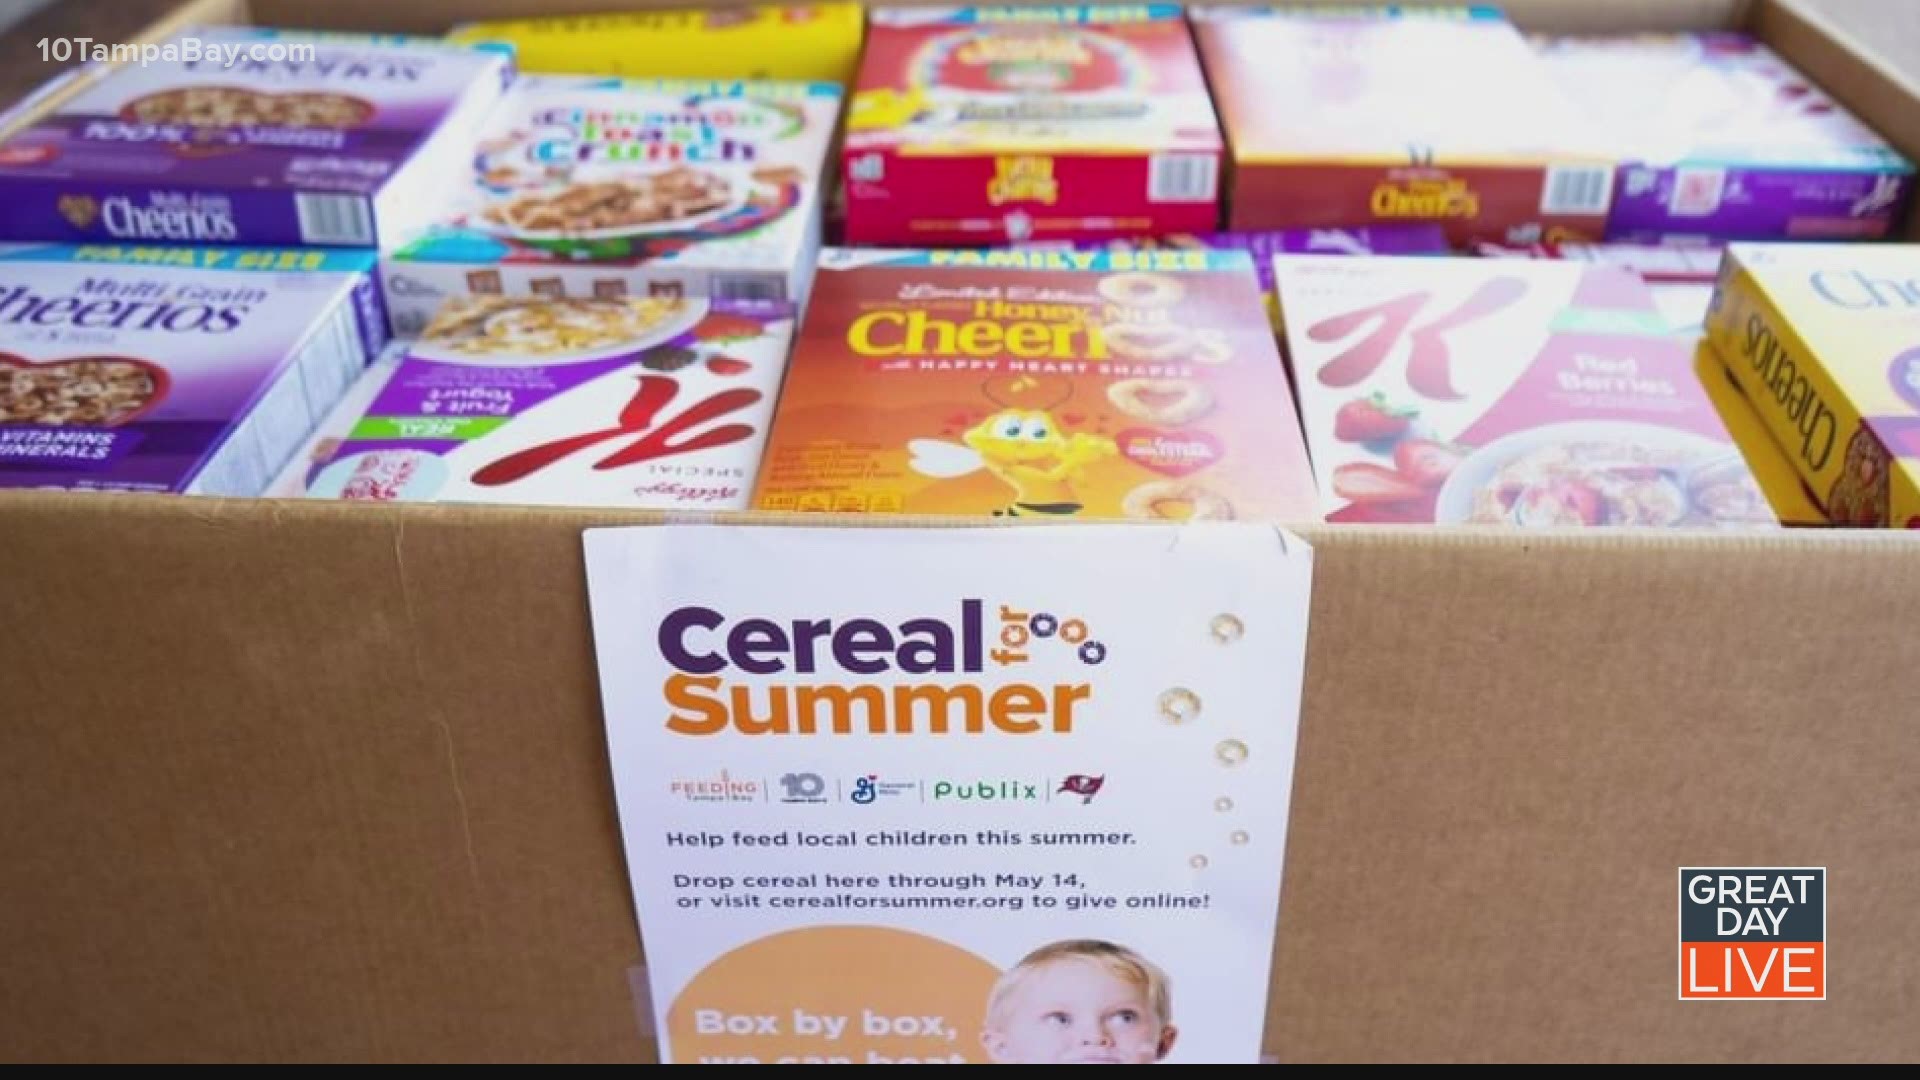 Cereal and cash donations add up to more than 2 million meals.